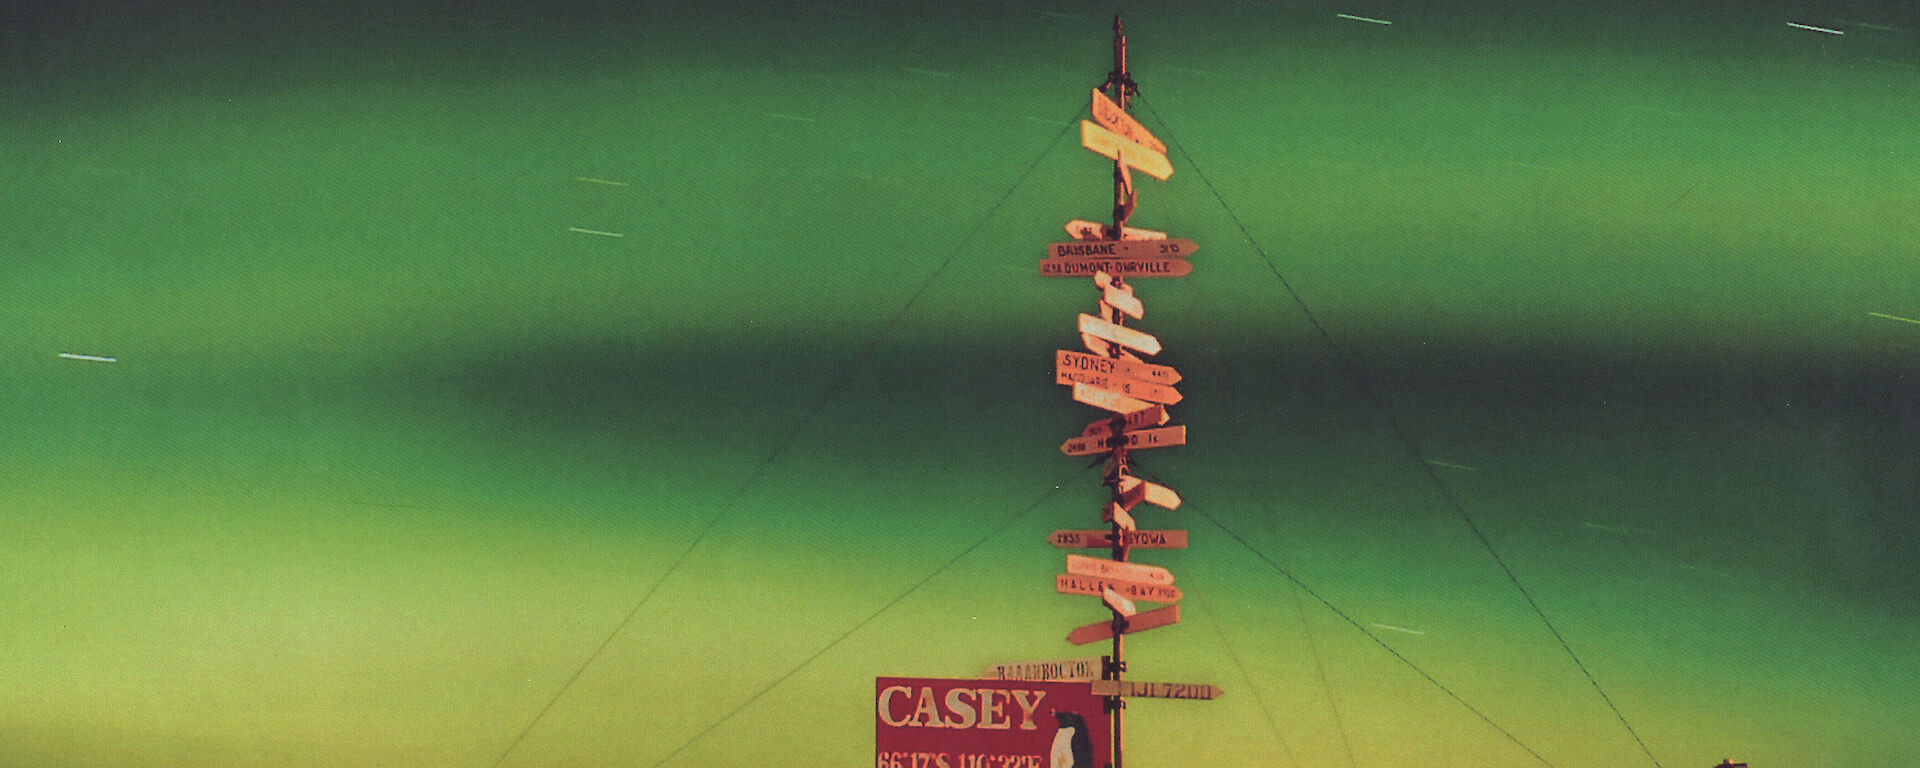 The Casey station 2010 yearbook cover with a colour photo of the aurora and the Casey station sign.